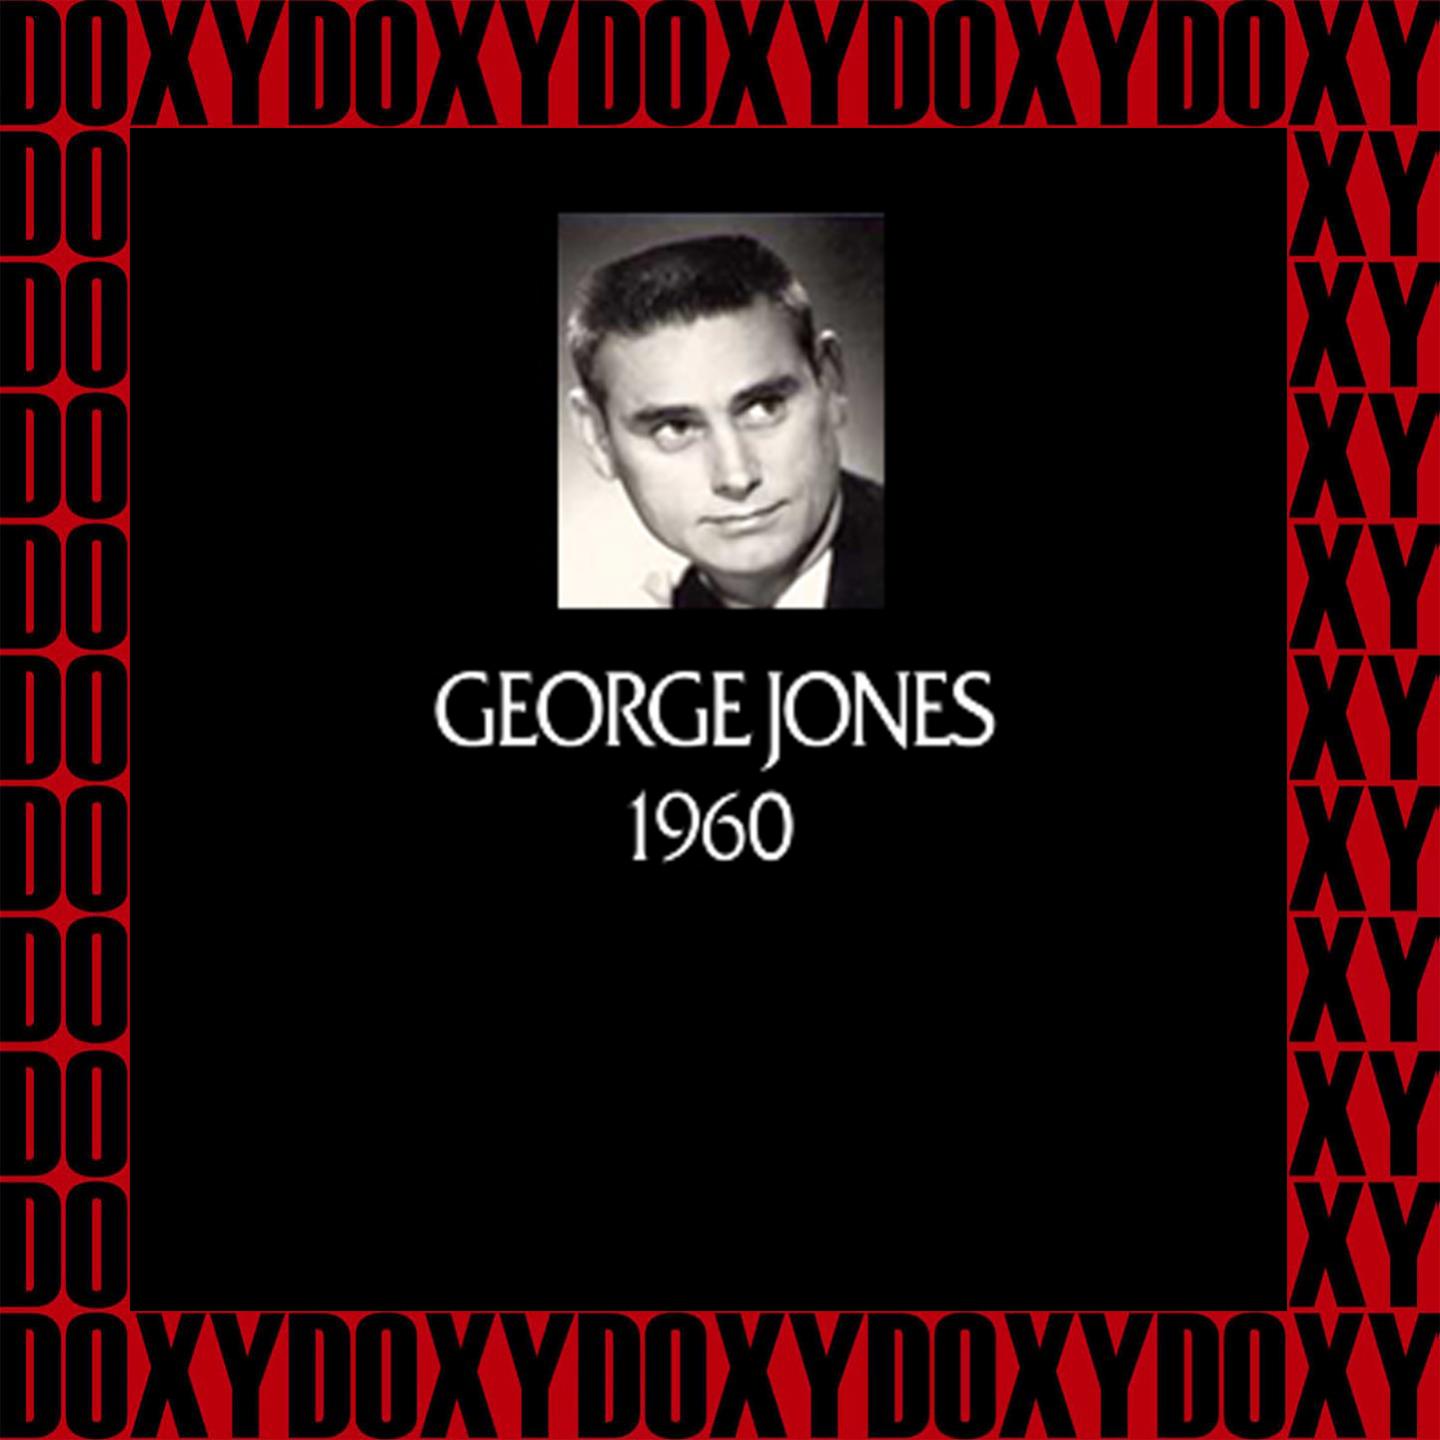 In Chronology - 1960 (Remastered Version) (Doxy Collection)